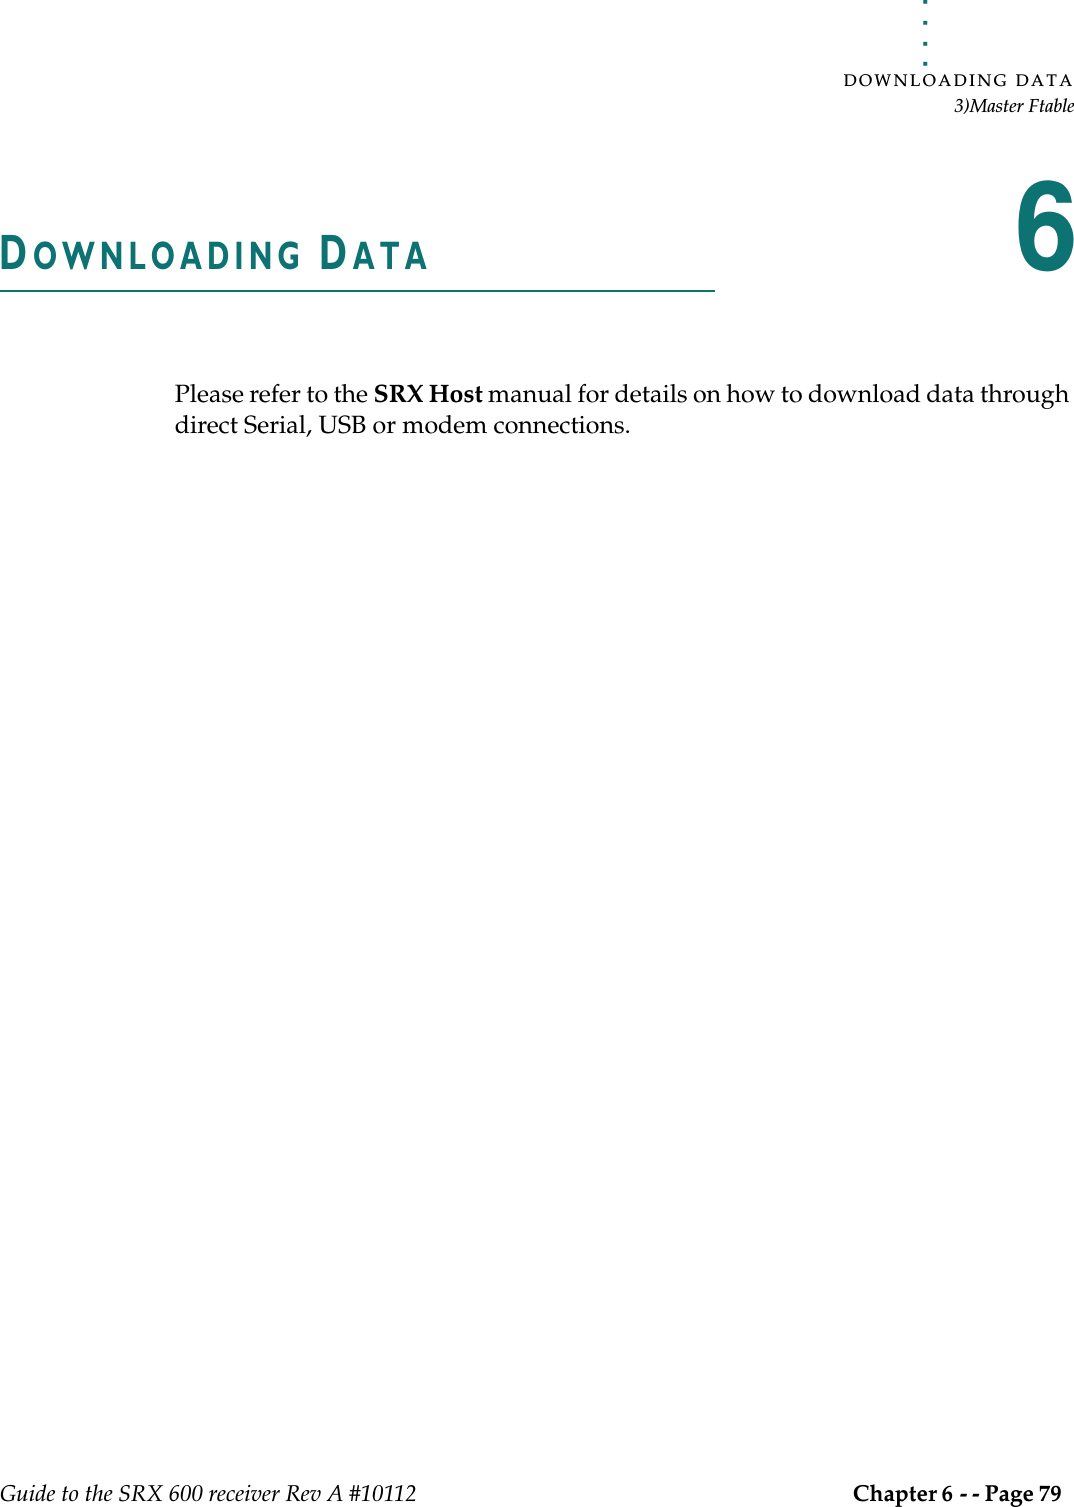 . . . . .DOWNLOADING DATA3)Master FtableGuide to the SRX 600 receiver Rev A #10112 Chapter 6 - - Page 79 DOWNLOADING DATA6Please refer to the SRX Host manual for details on how to download data through direct Serial, USB or modem connections.